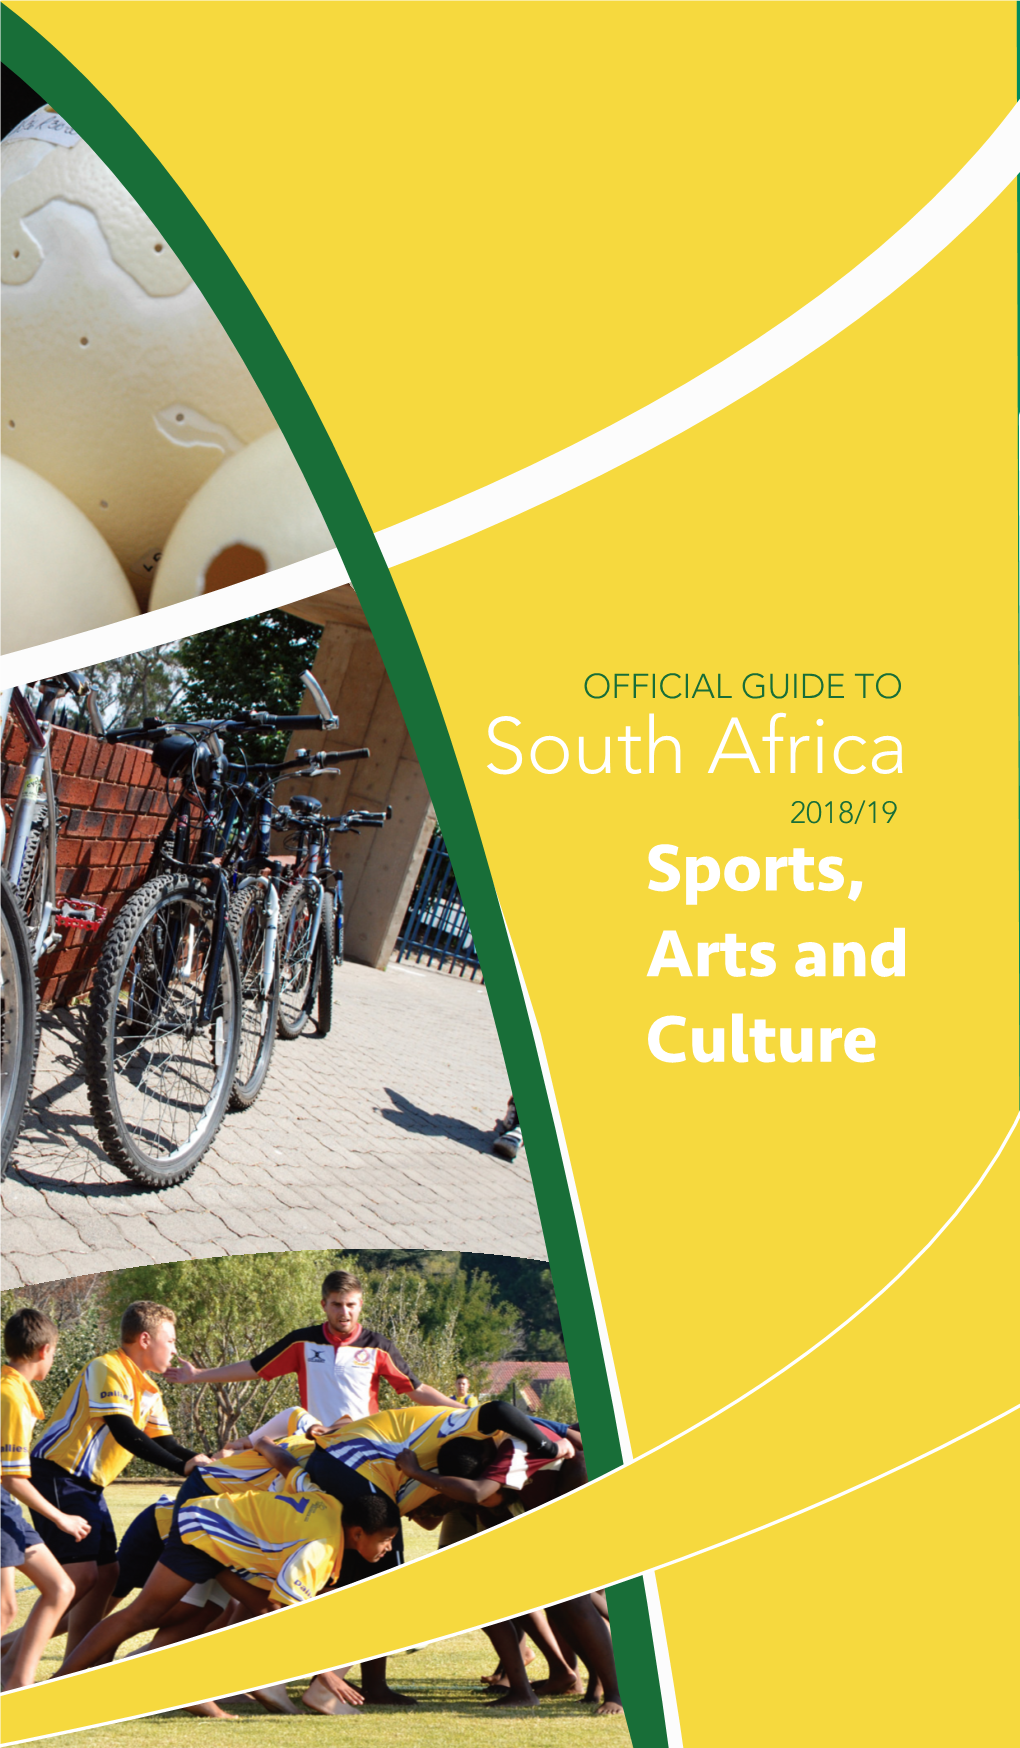 South Africa 2018/19 Sports, Arts and Culture